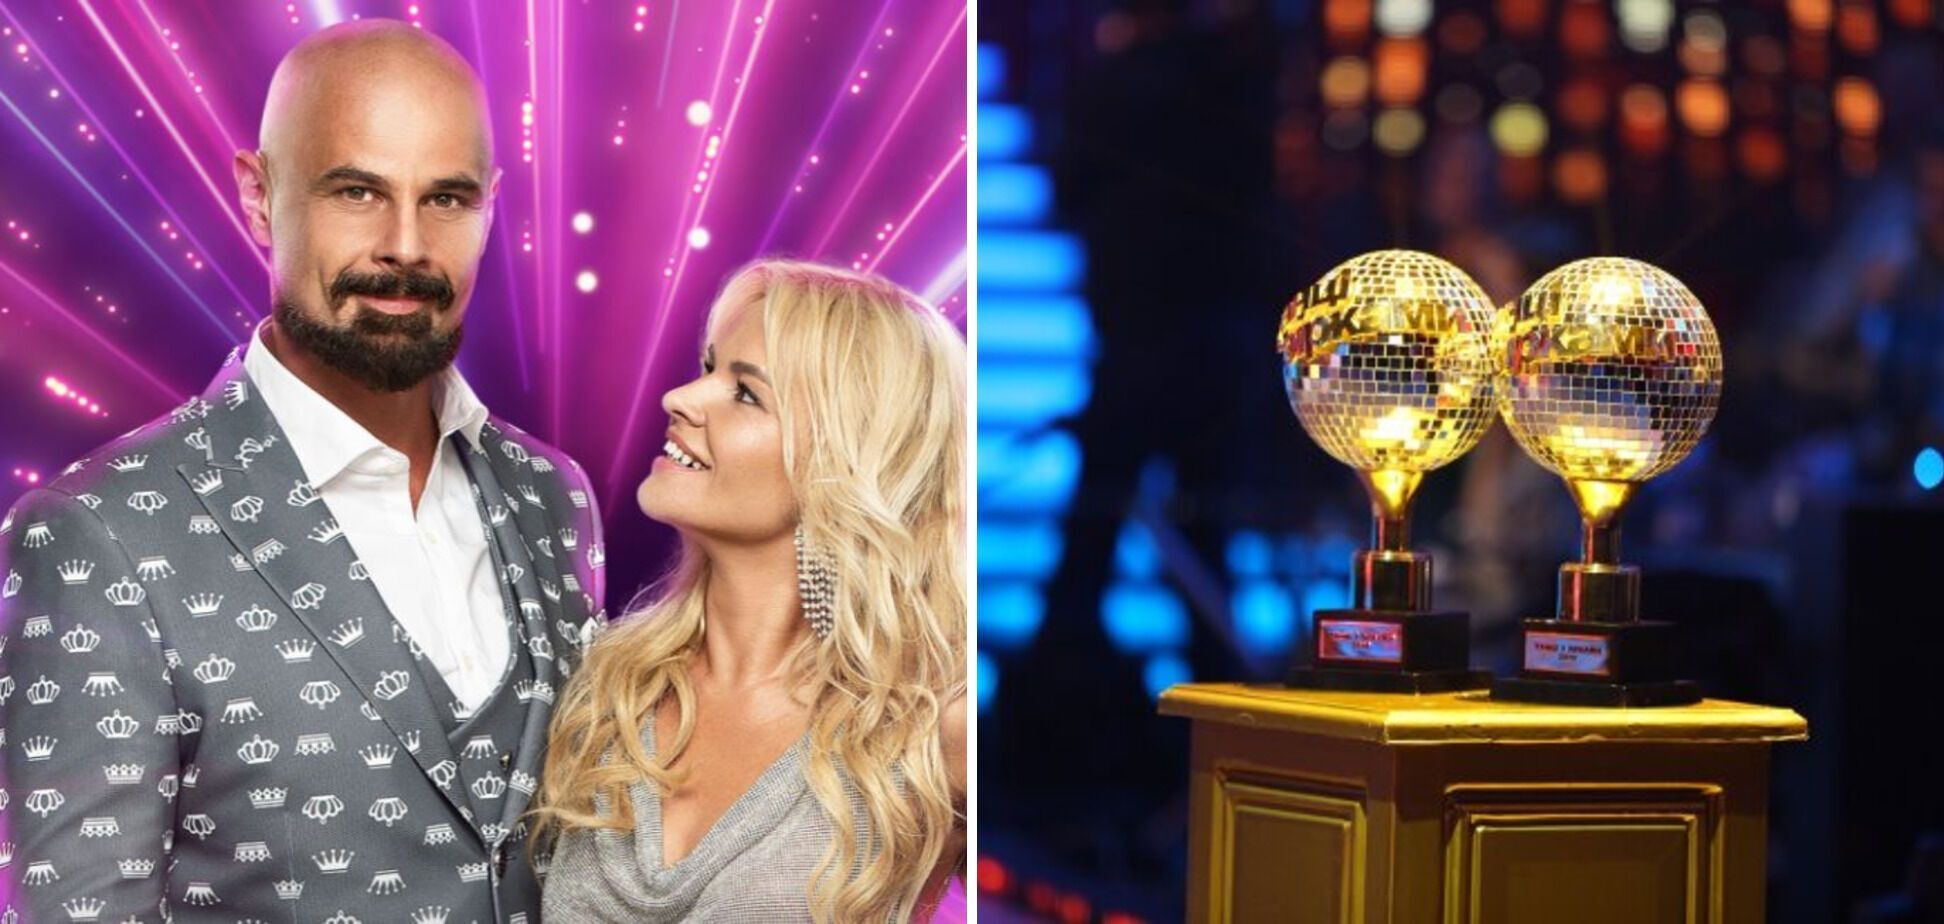 ''Was supposed to step onto the dance floor in a Soviet uniform.'' A participant of ''Dancing with the Stars'' revealed details of the high-profile conflict on the show for the first time